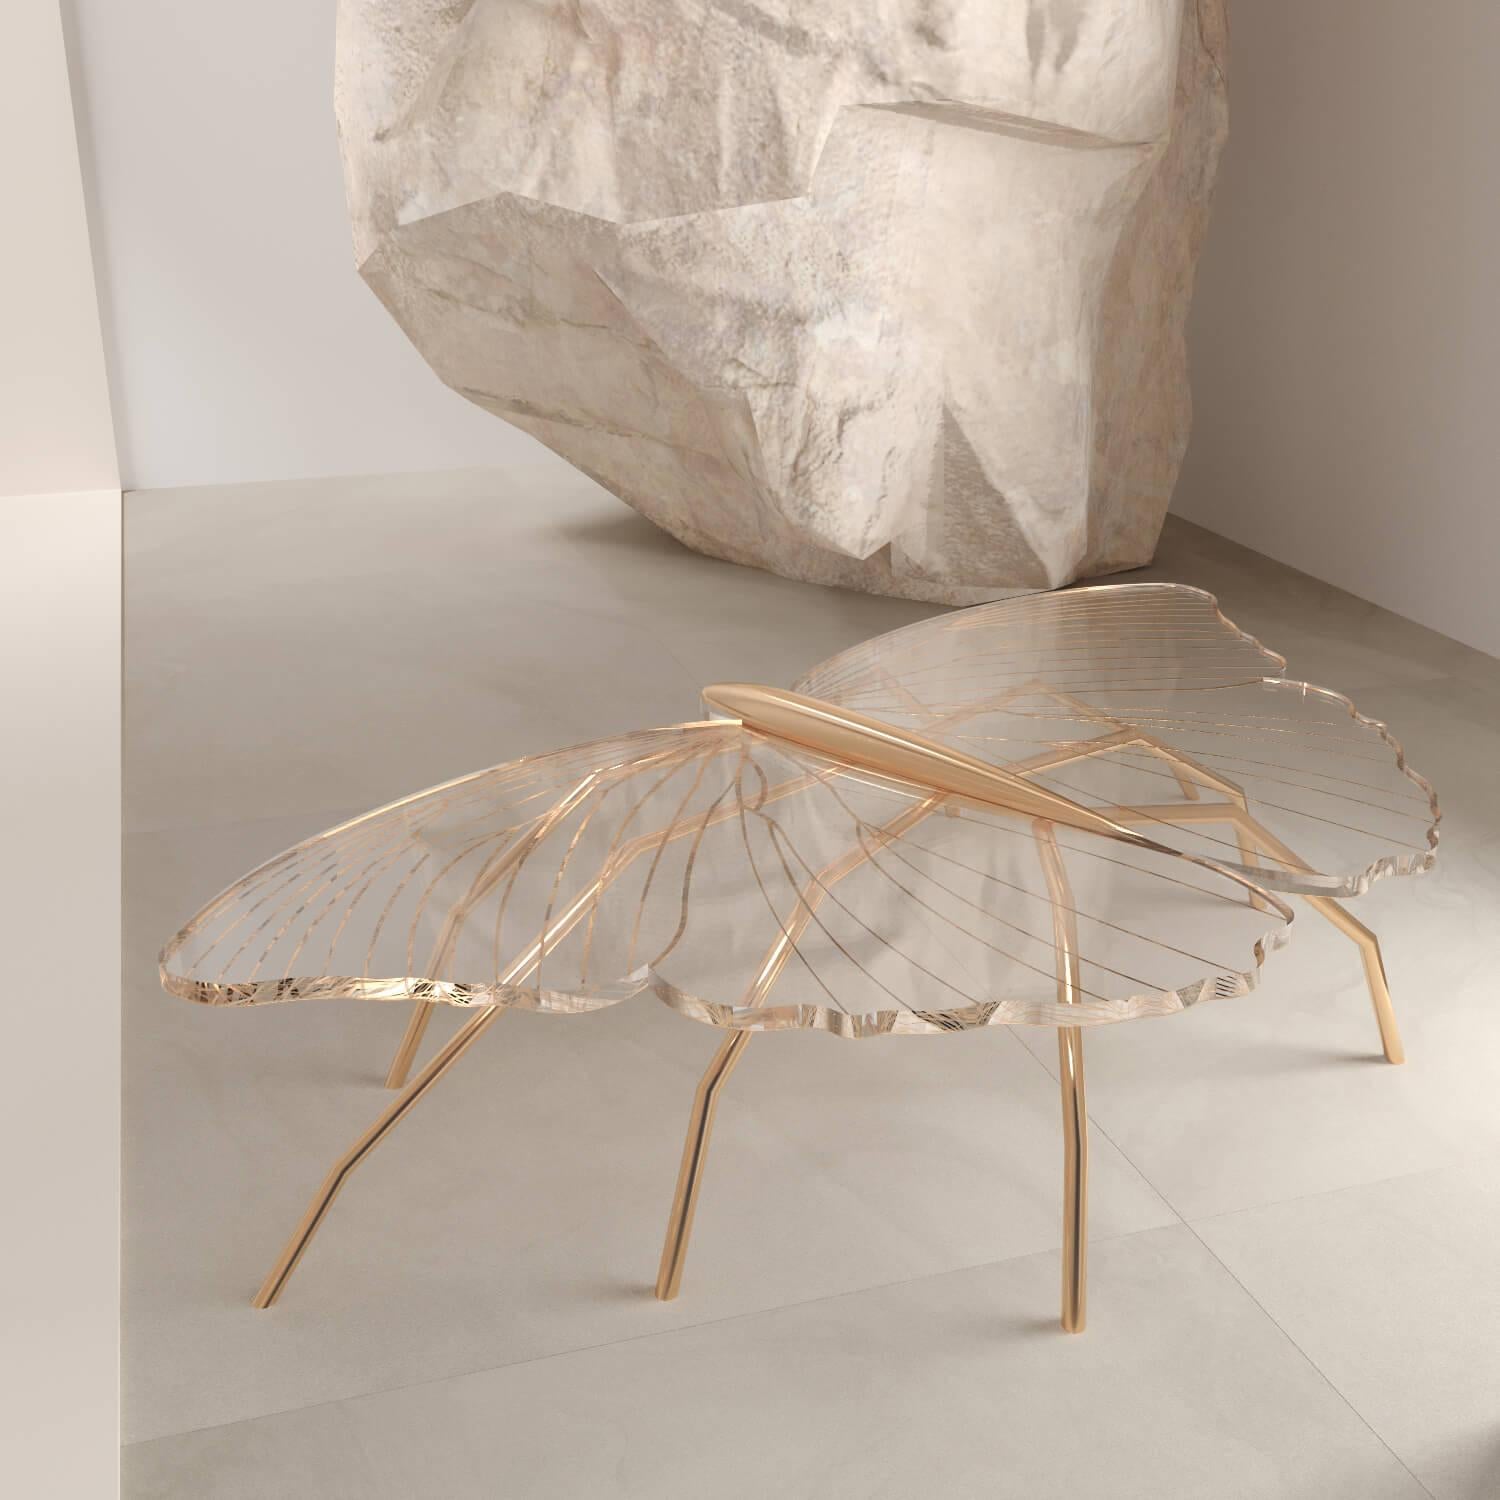 Our Nature Collection is eclectic and incomplete. The coffee table from this collection has a butterfly-inspired shape. We will always be waiting for Nature's next inspiration. 

The legs can be made of polished brass or polished copper. The